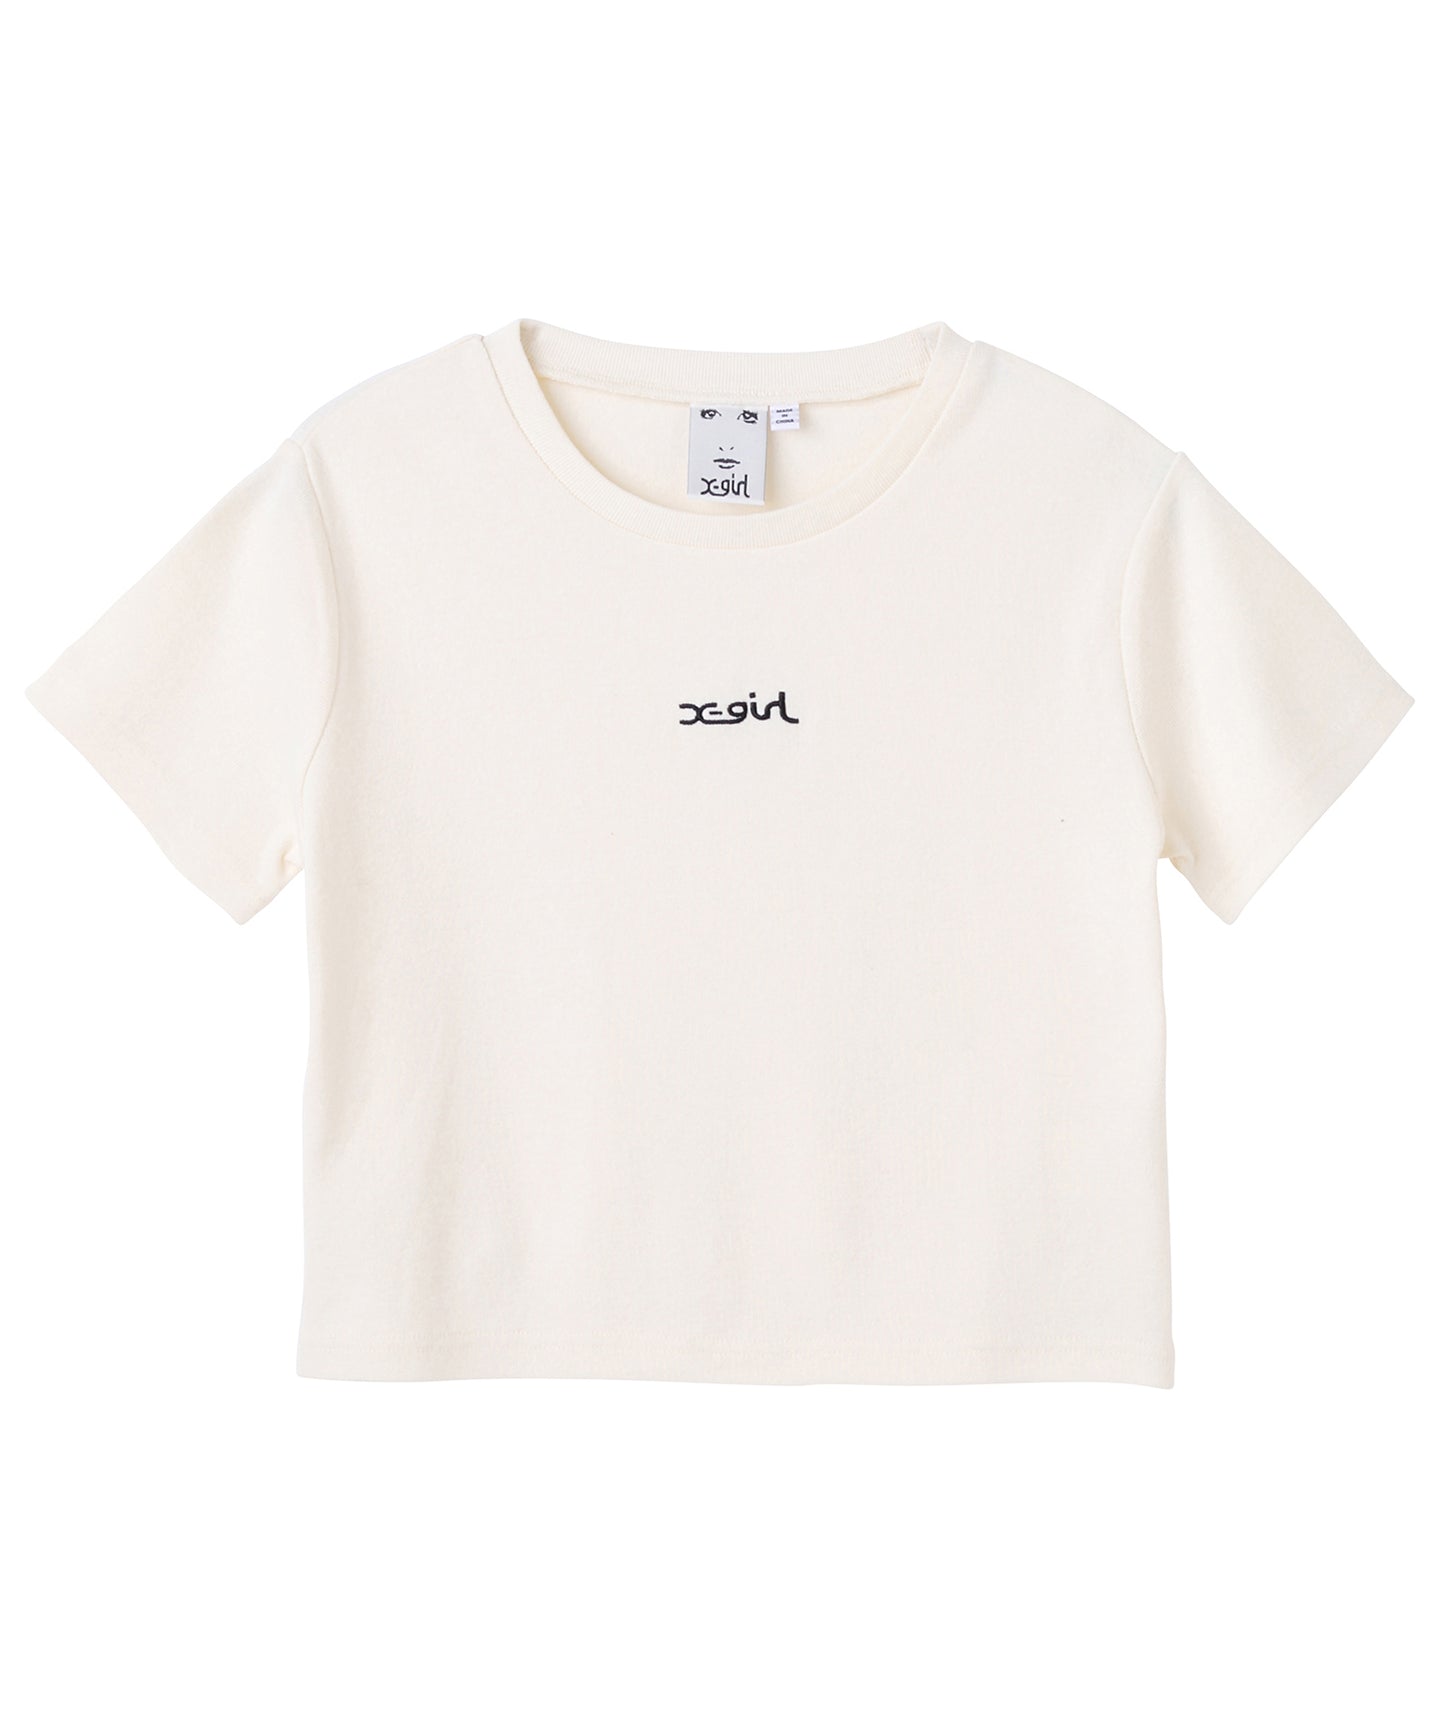 EMBROIDERED MILLS LOGO S/S BABY TEE